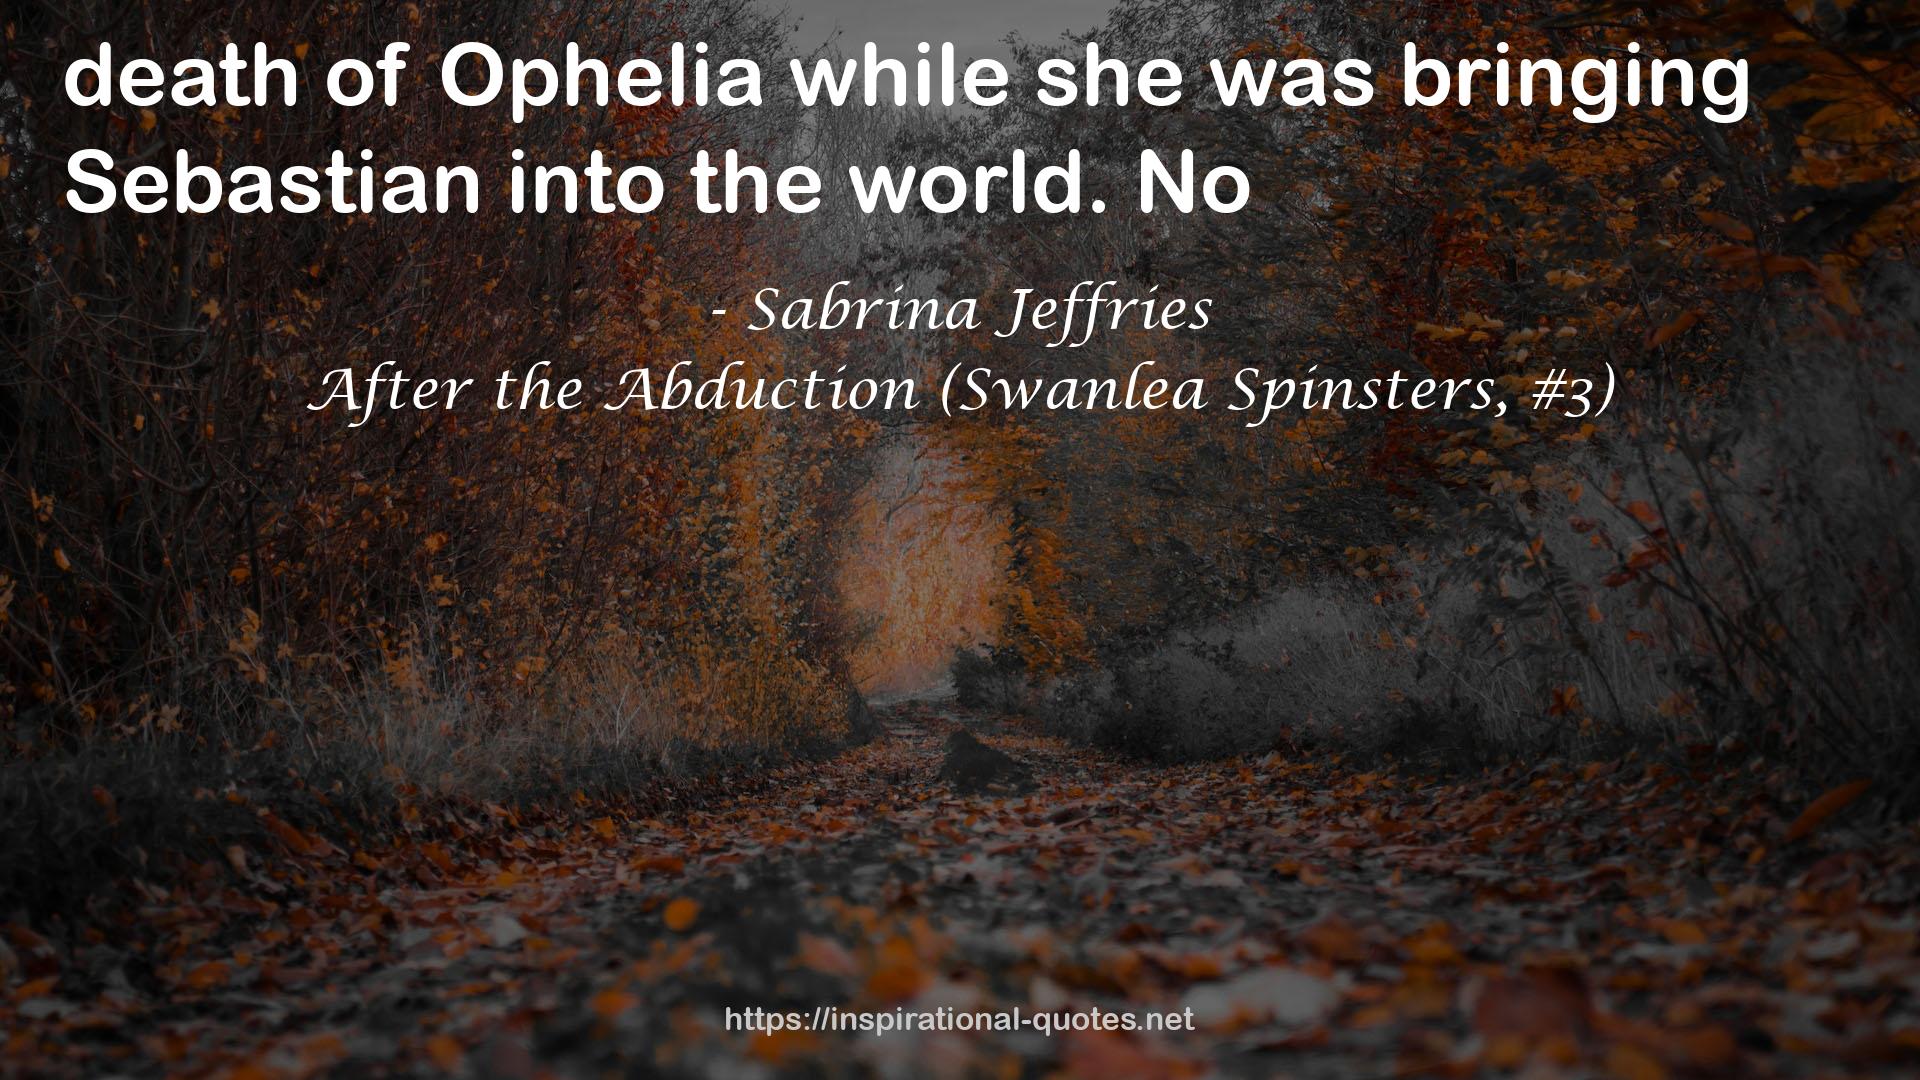 After the Abduction (Swanlea Spinsters, #3) QUOTES